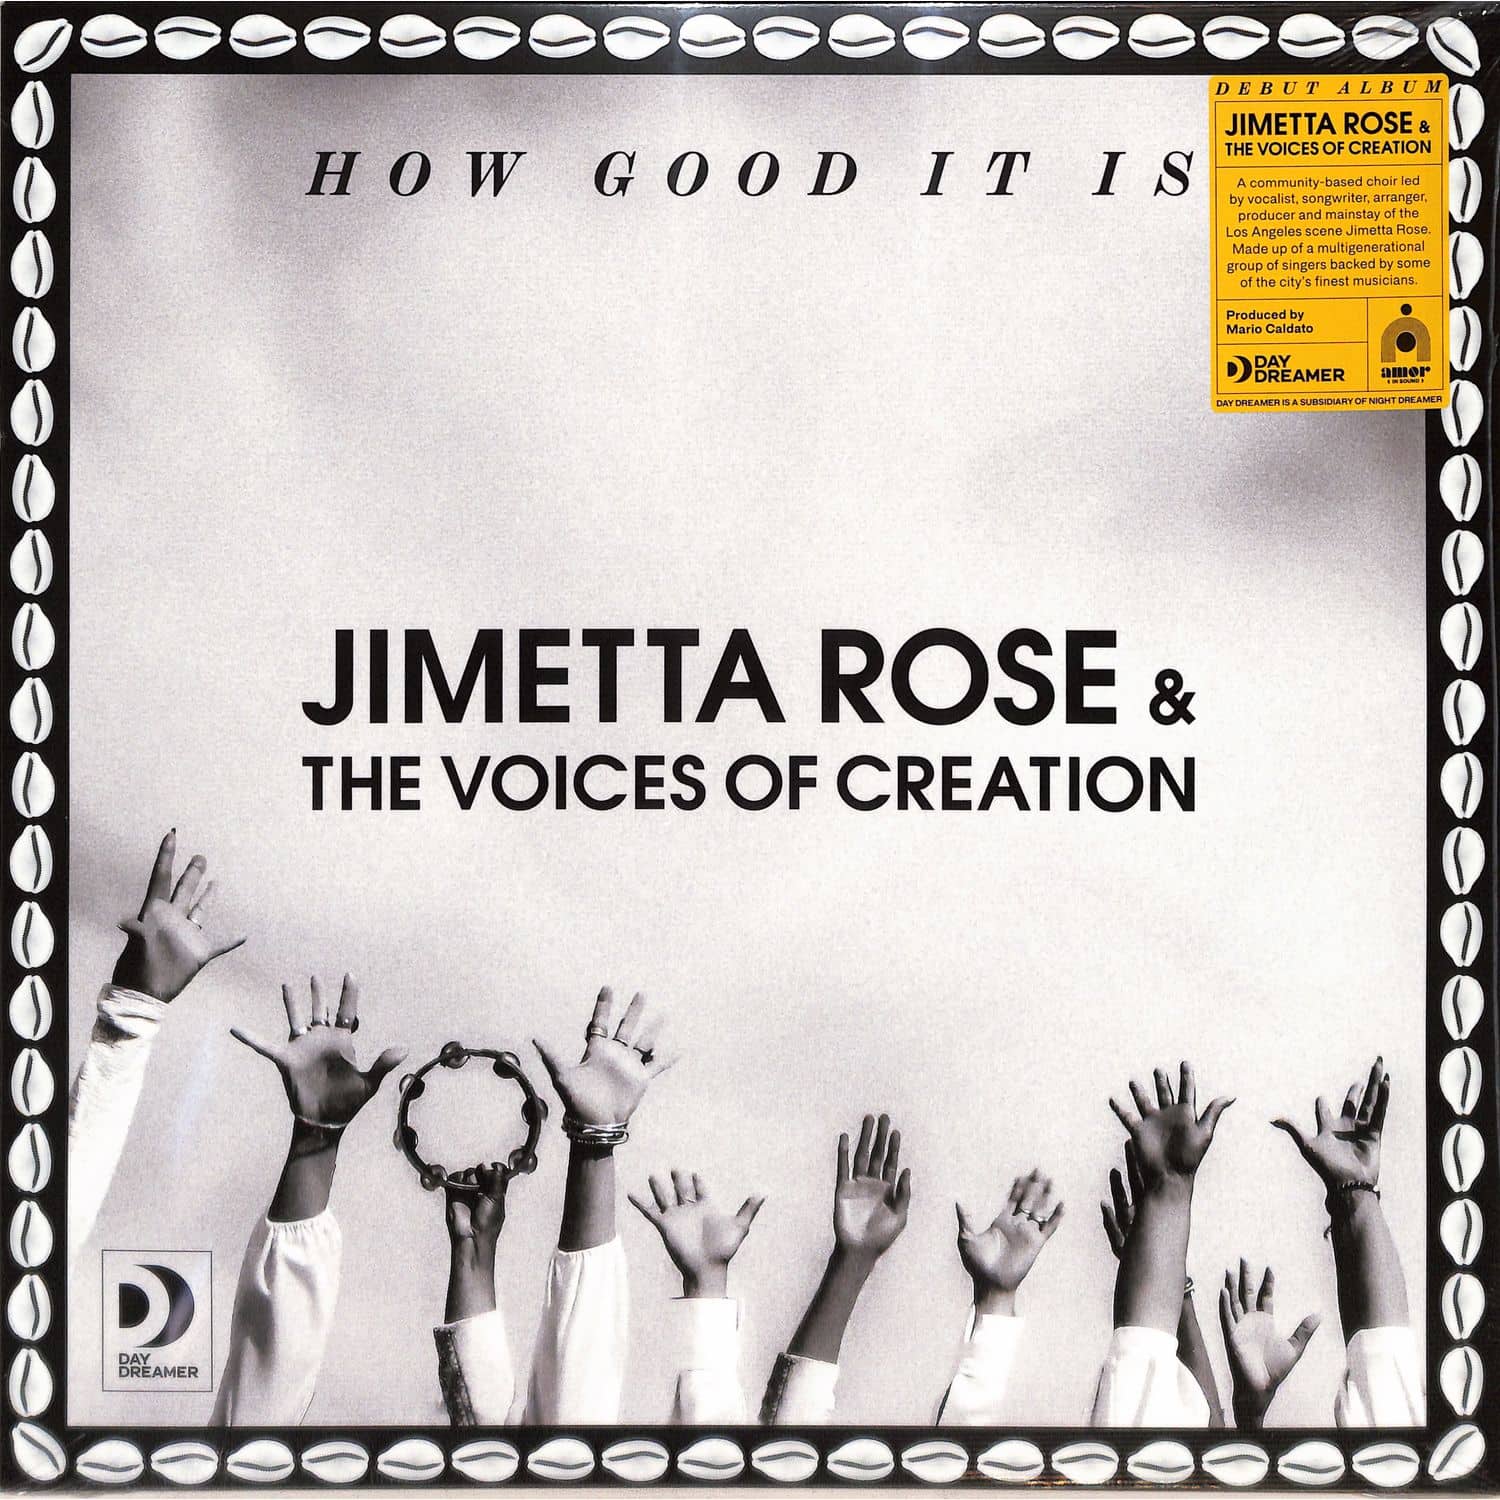 Jimetta Rose & The Voices Of Creation - HOW GOOD IT IS 